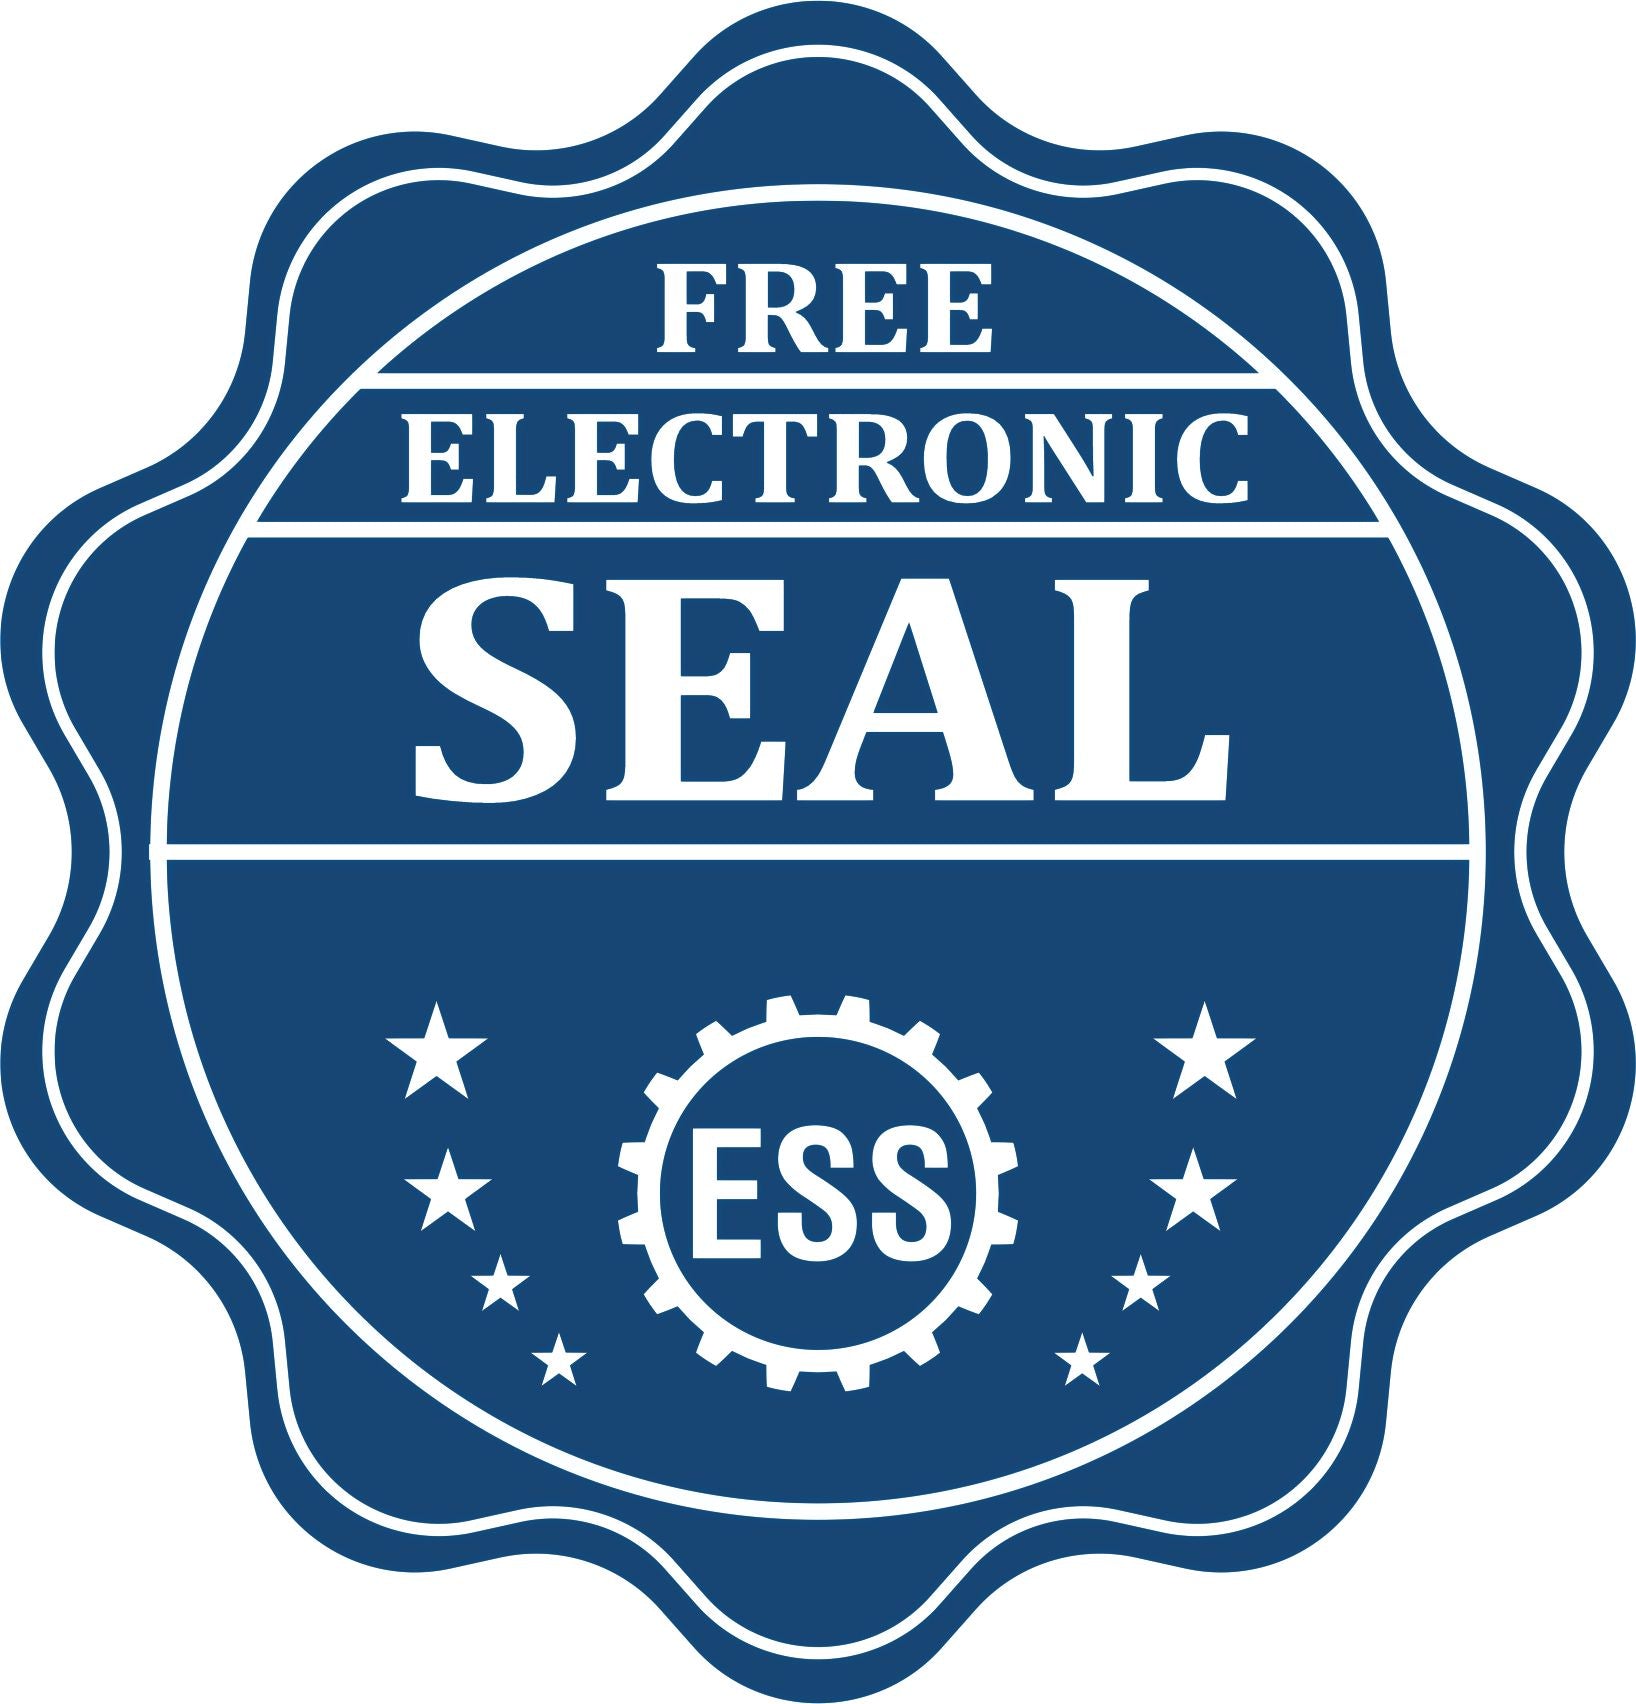 A badge showing a free electronic seal for the Long Reach Mississippi Geology Seal with stars and the ESS gear on the emblem.